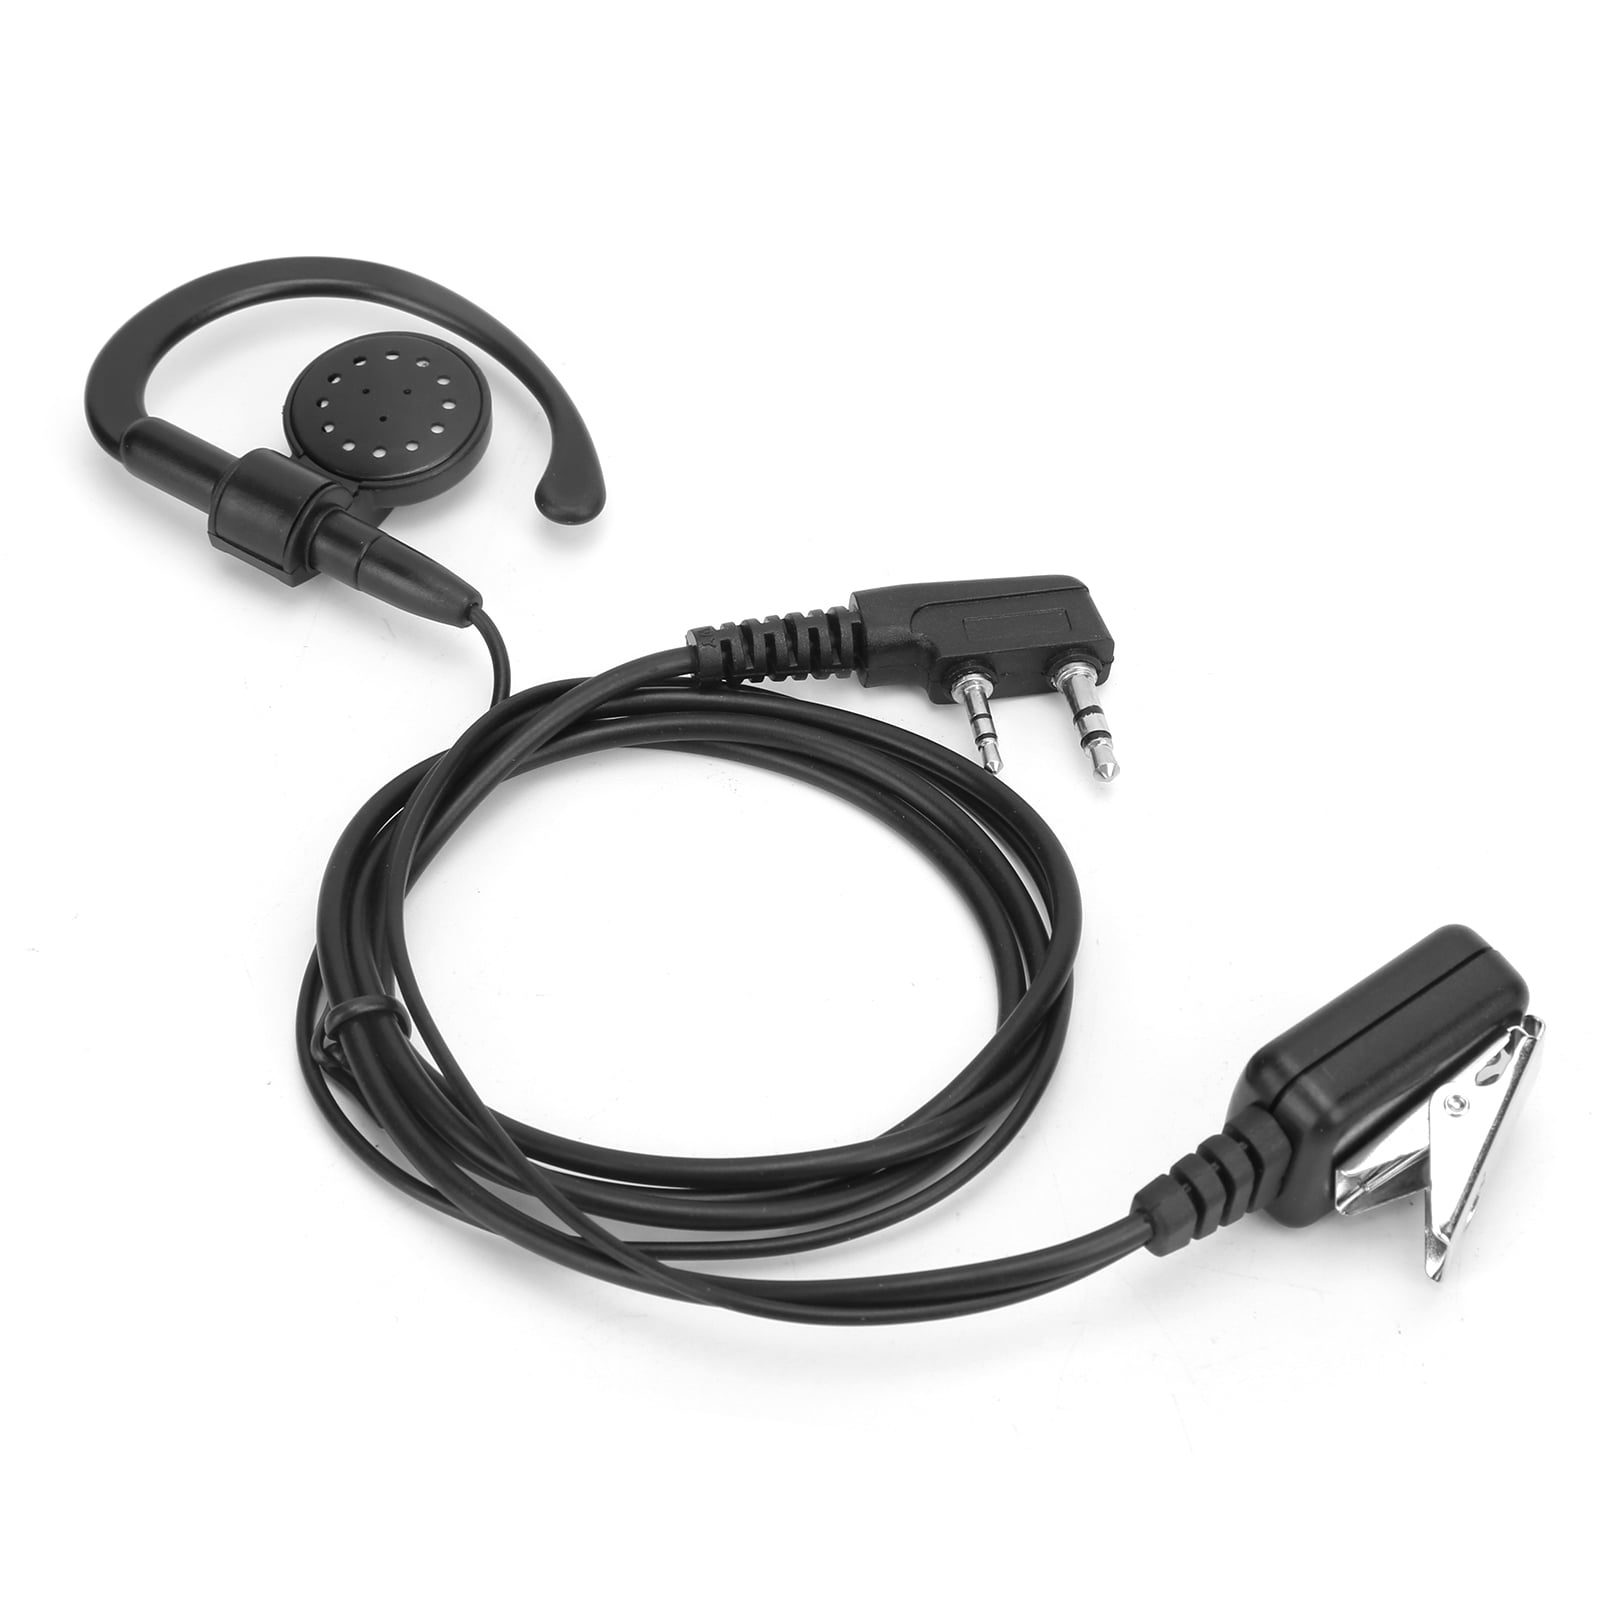 2 Pin Acoustic Earpiece with Mic Law Enforcement Walkie Headset for Two Way Radio UV 5R/5RA/5RA+/5RB/5RC/5RD/5RE/5RE 666s 777s 888s 